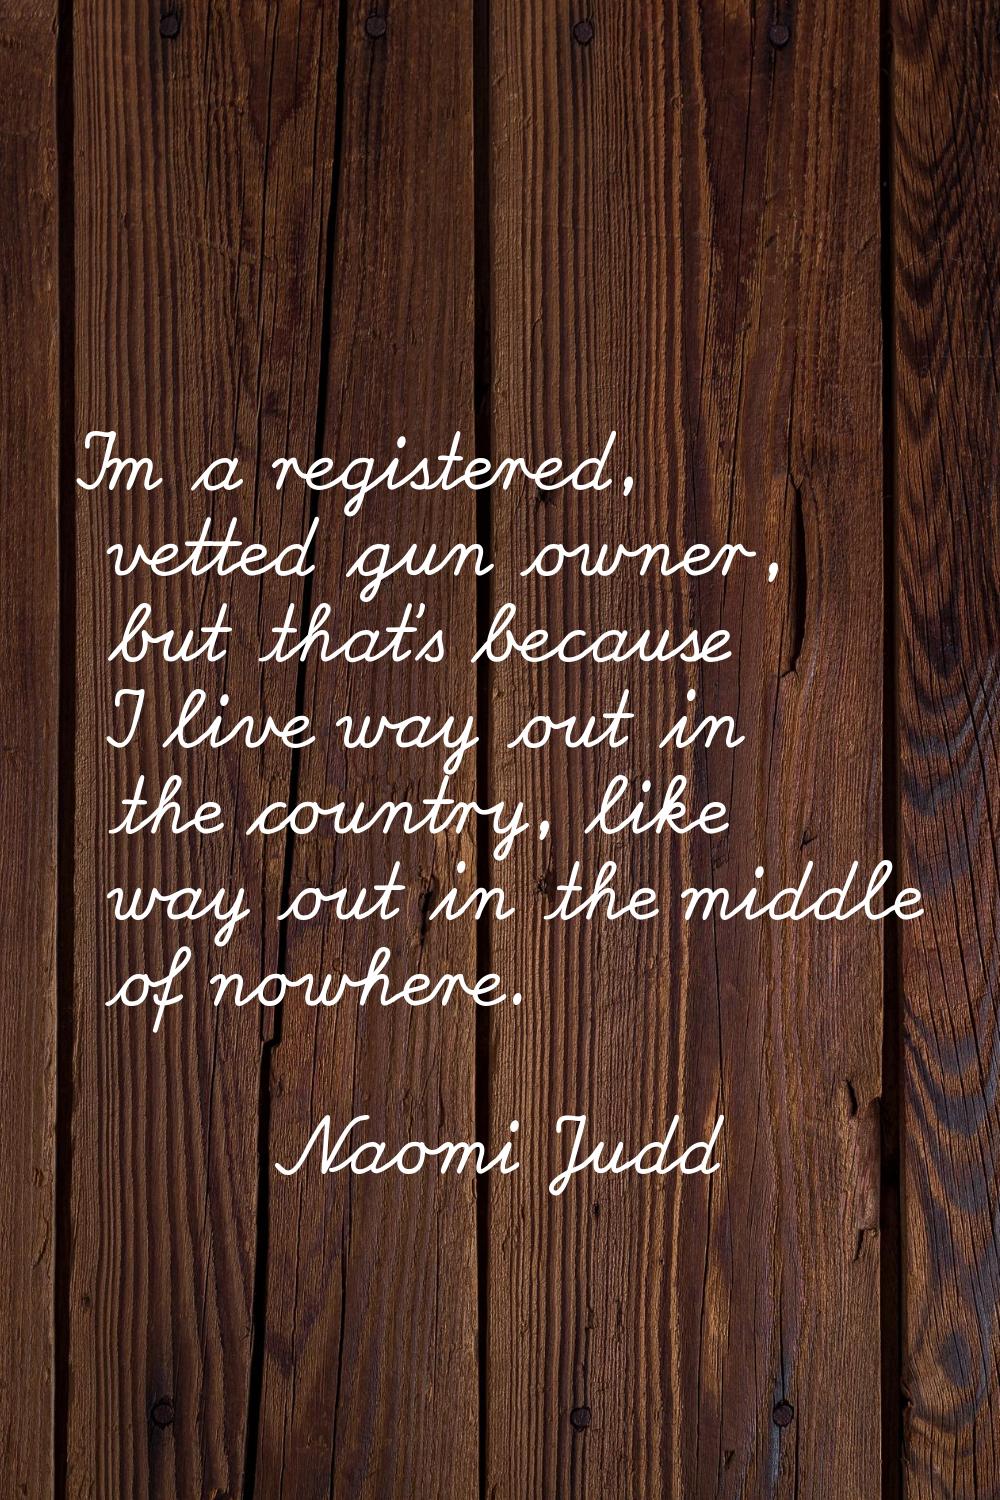 I'm a registered, vetted gun owner, but that's because I live way out in the country, like way out 